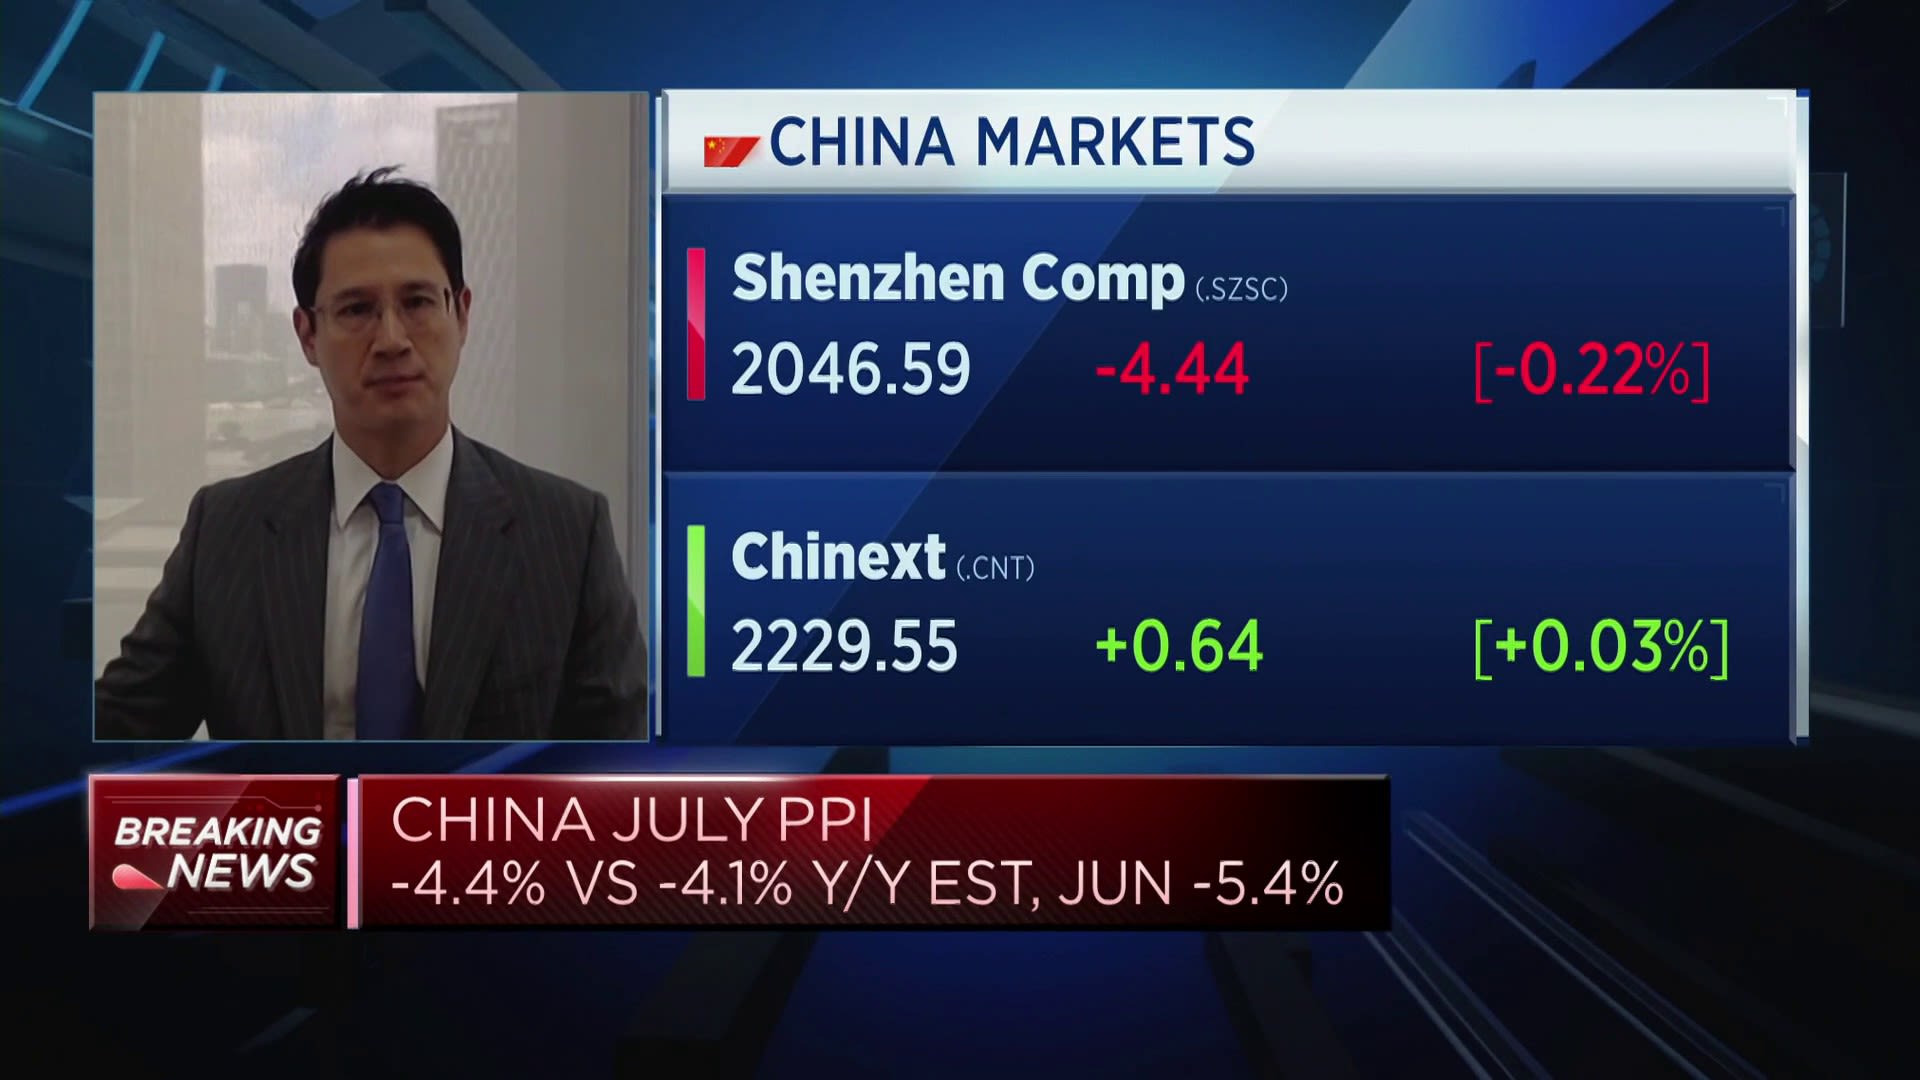 Lack of confidence, not stimulus is the real problem facing the Chinese economy: Analyst